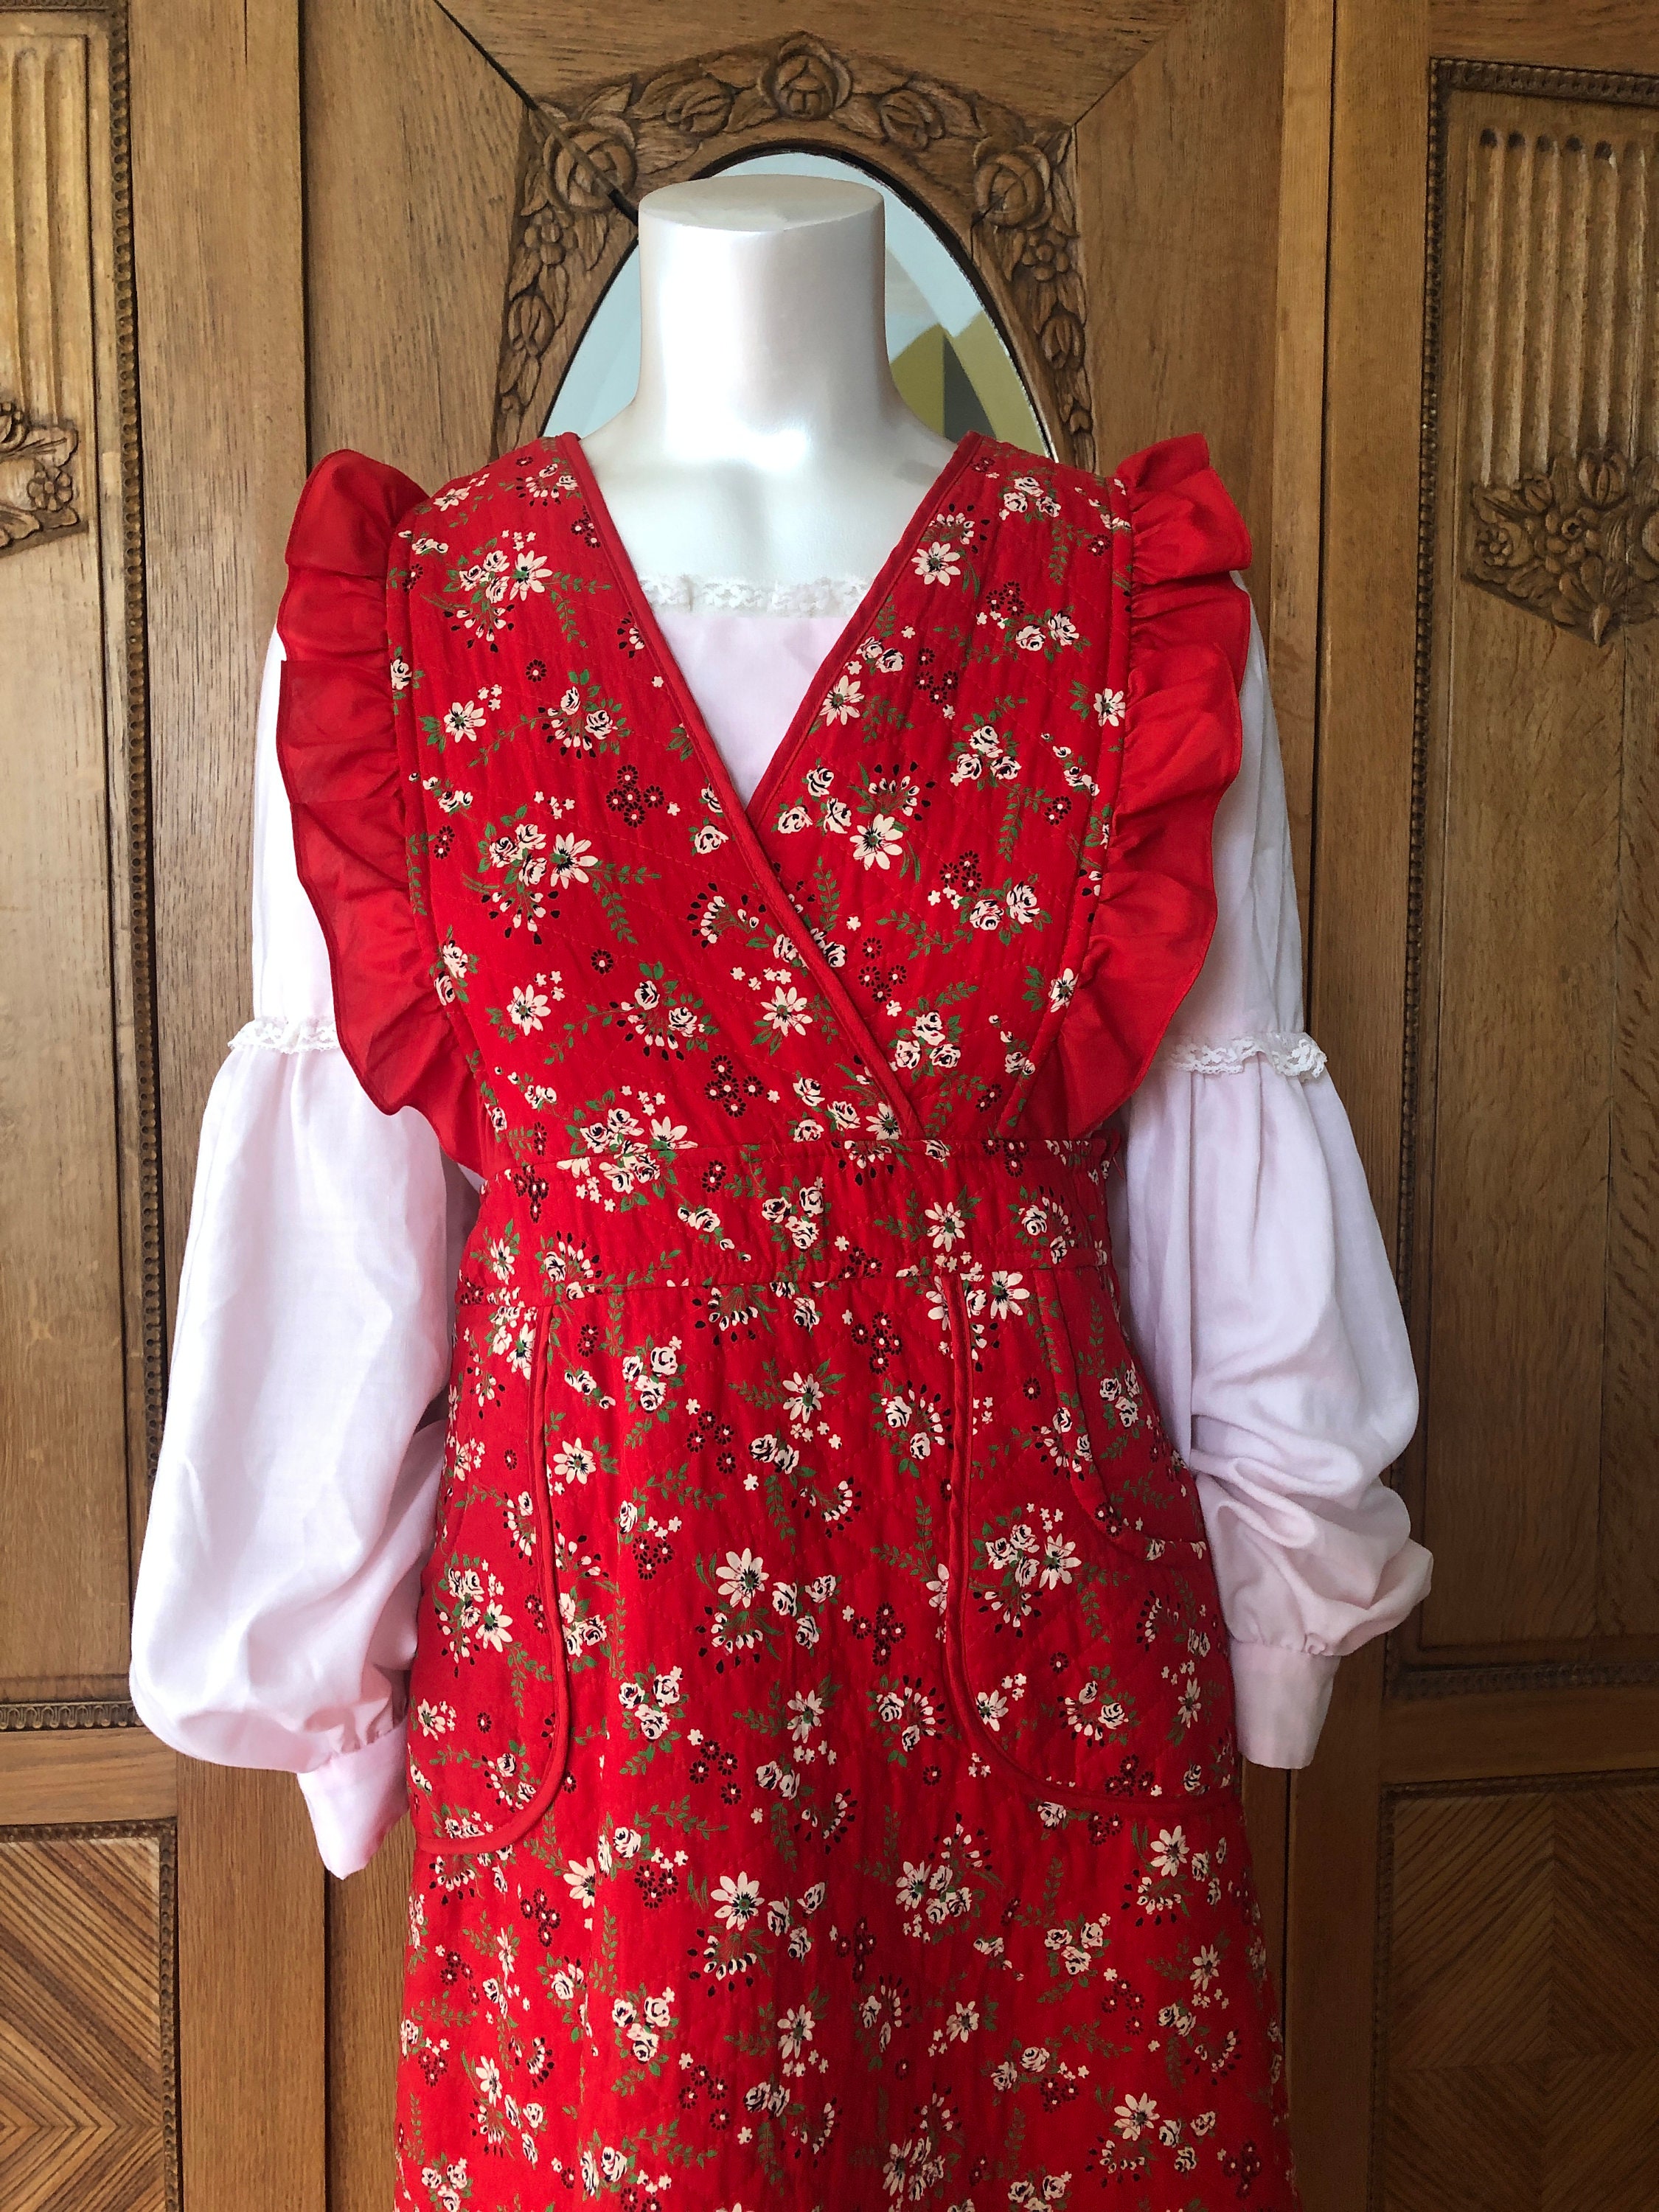 Vintage Aprons, Retro Aprons, Old Fashioned Aprons & Patterns 70s Quilted Dress in Red Calico Vintage Surplice Hippie Apron $80.32 AT vintagedancer.com